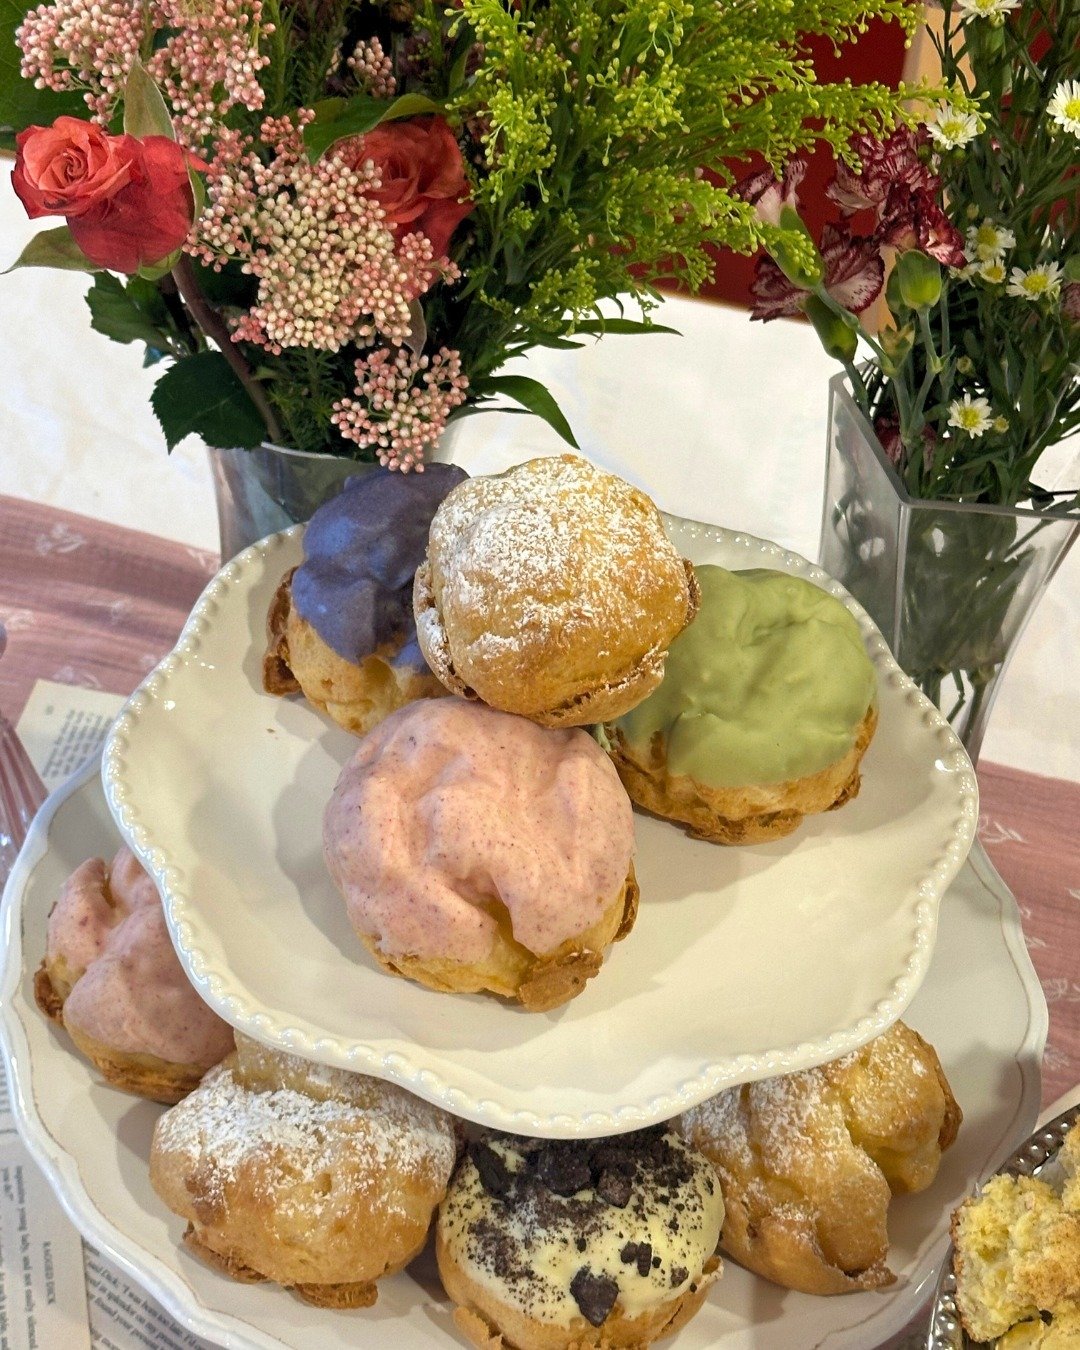 Spring is in full BLOOM with the #worldsbestcreampuff 🌸 🌺 🌼 🌷 🌹 🌻 
💙 Use code APRIL for 10% off any online/app order! 
*participating stores may vary*

#dessert #foodie #spring